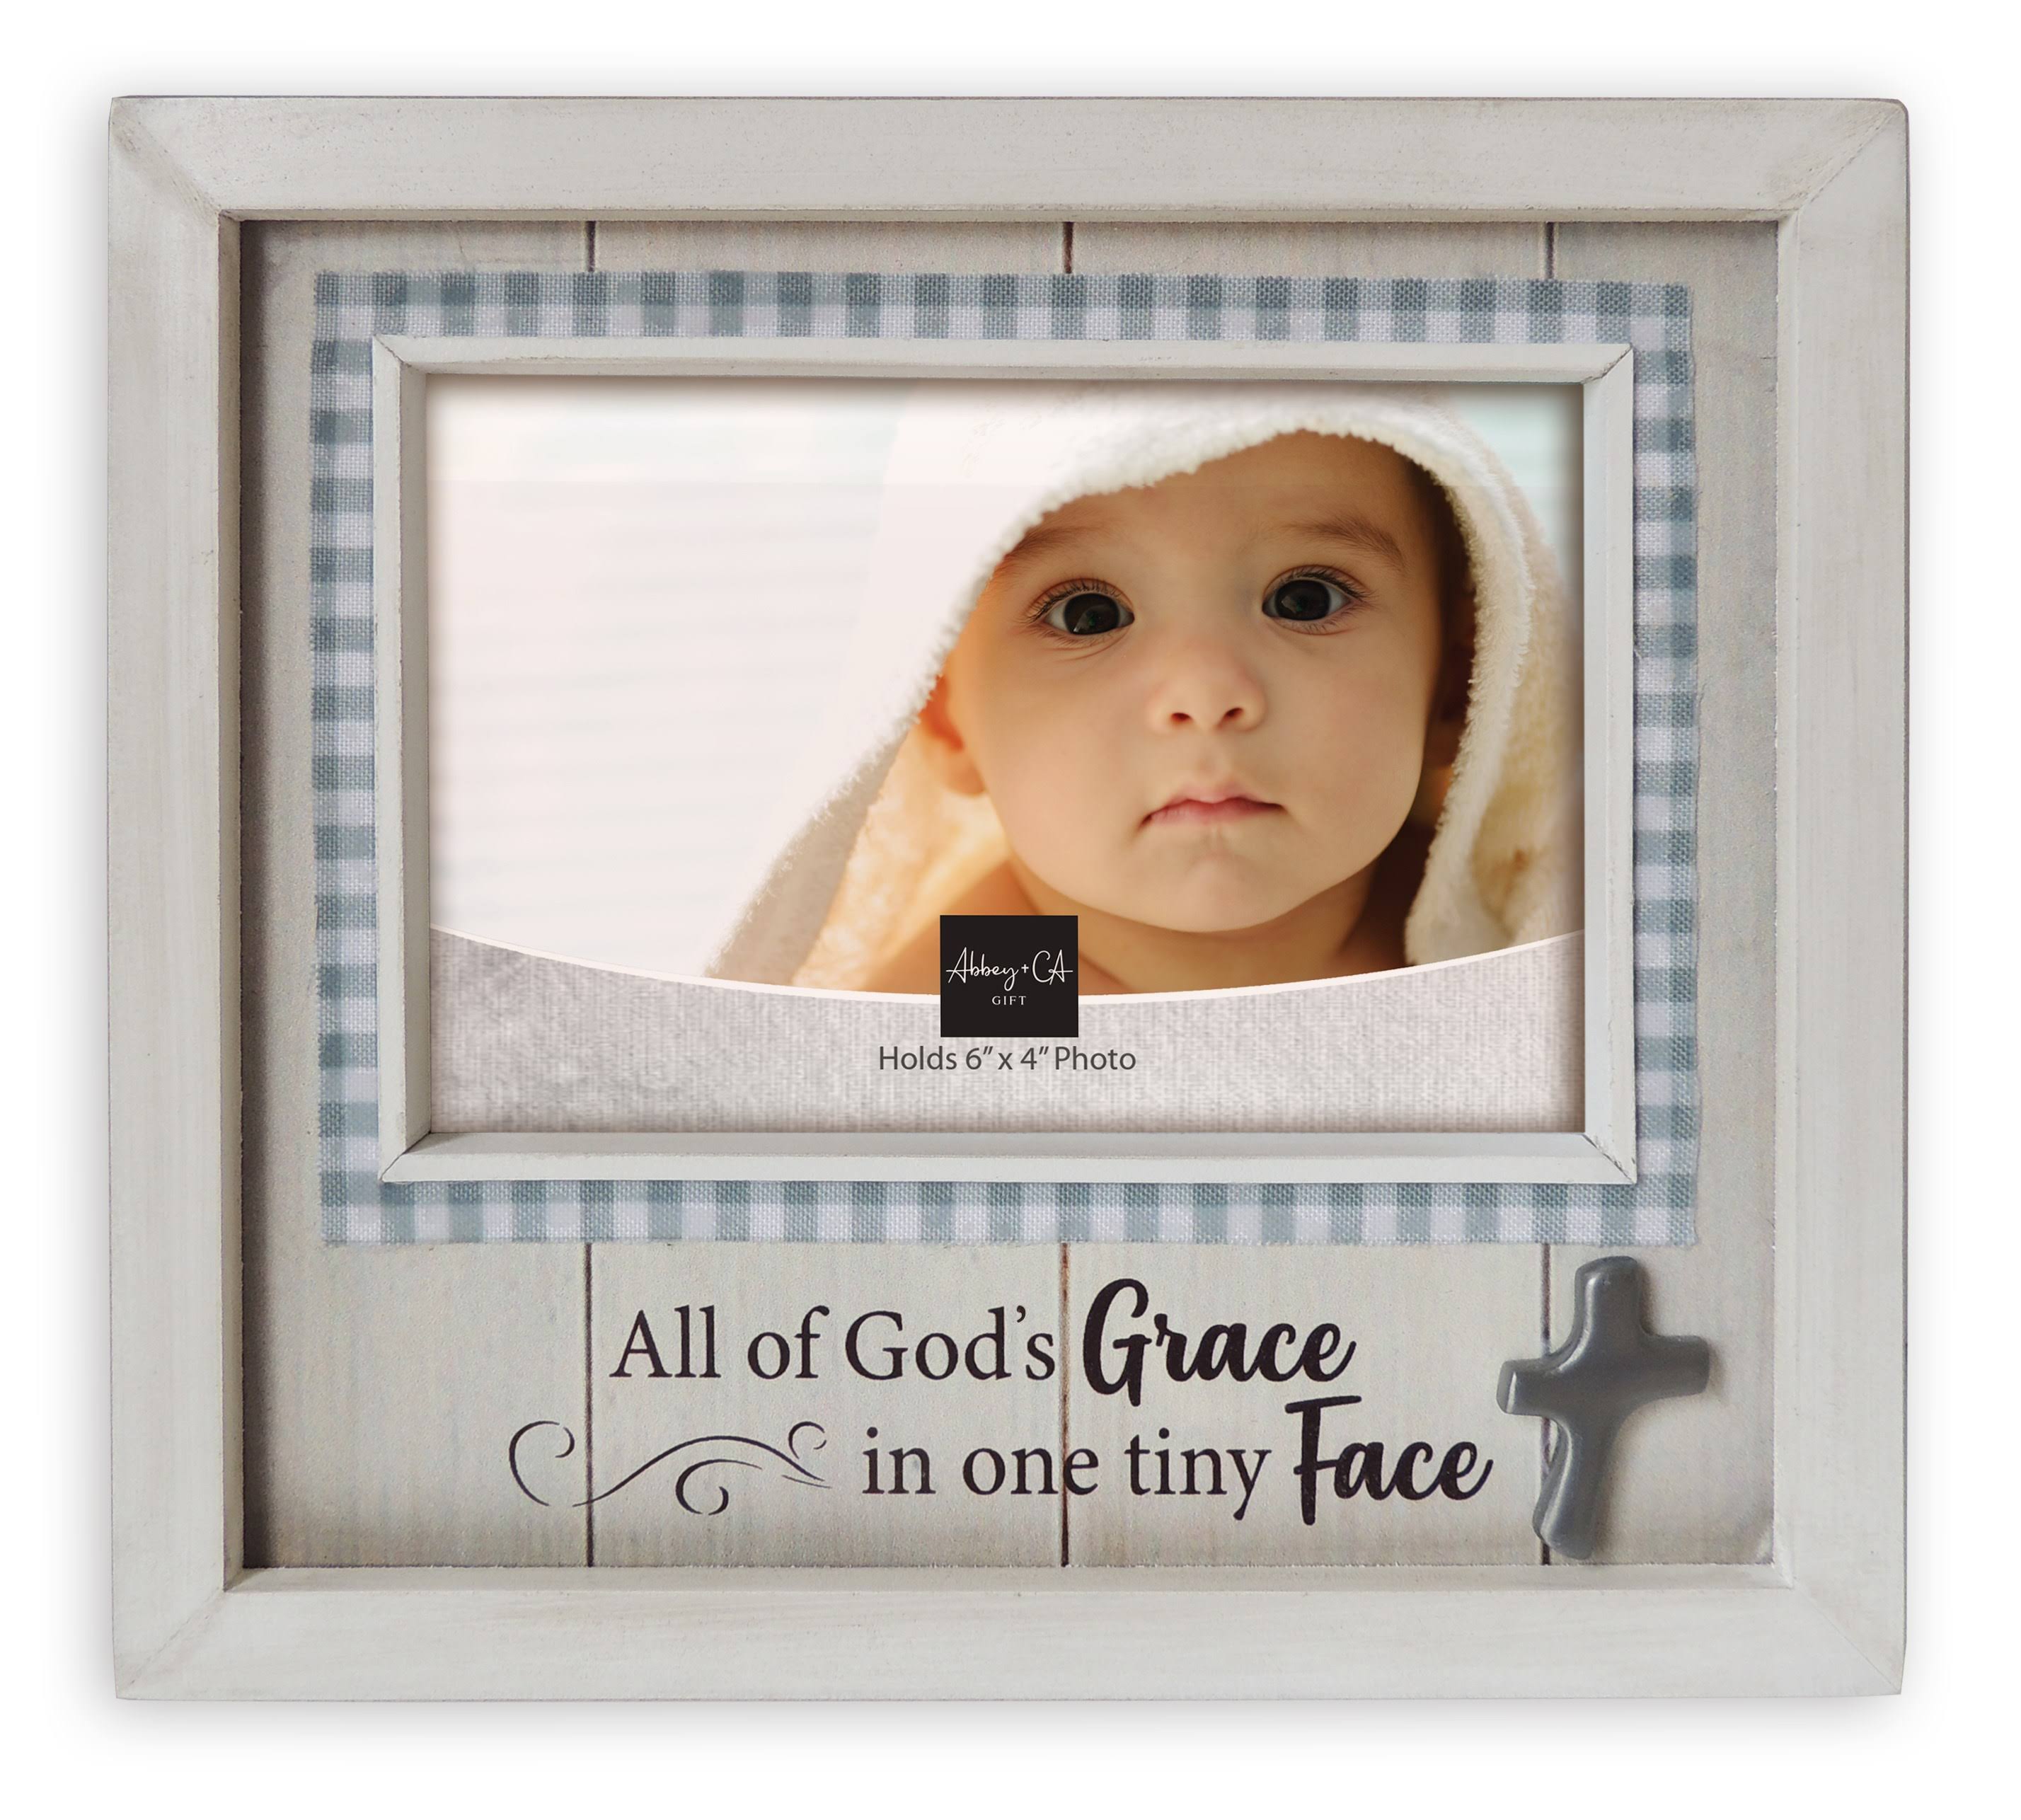 God's Grace Baby Picture Frame